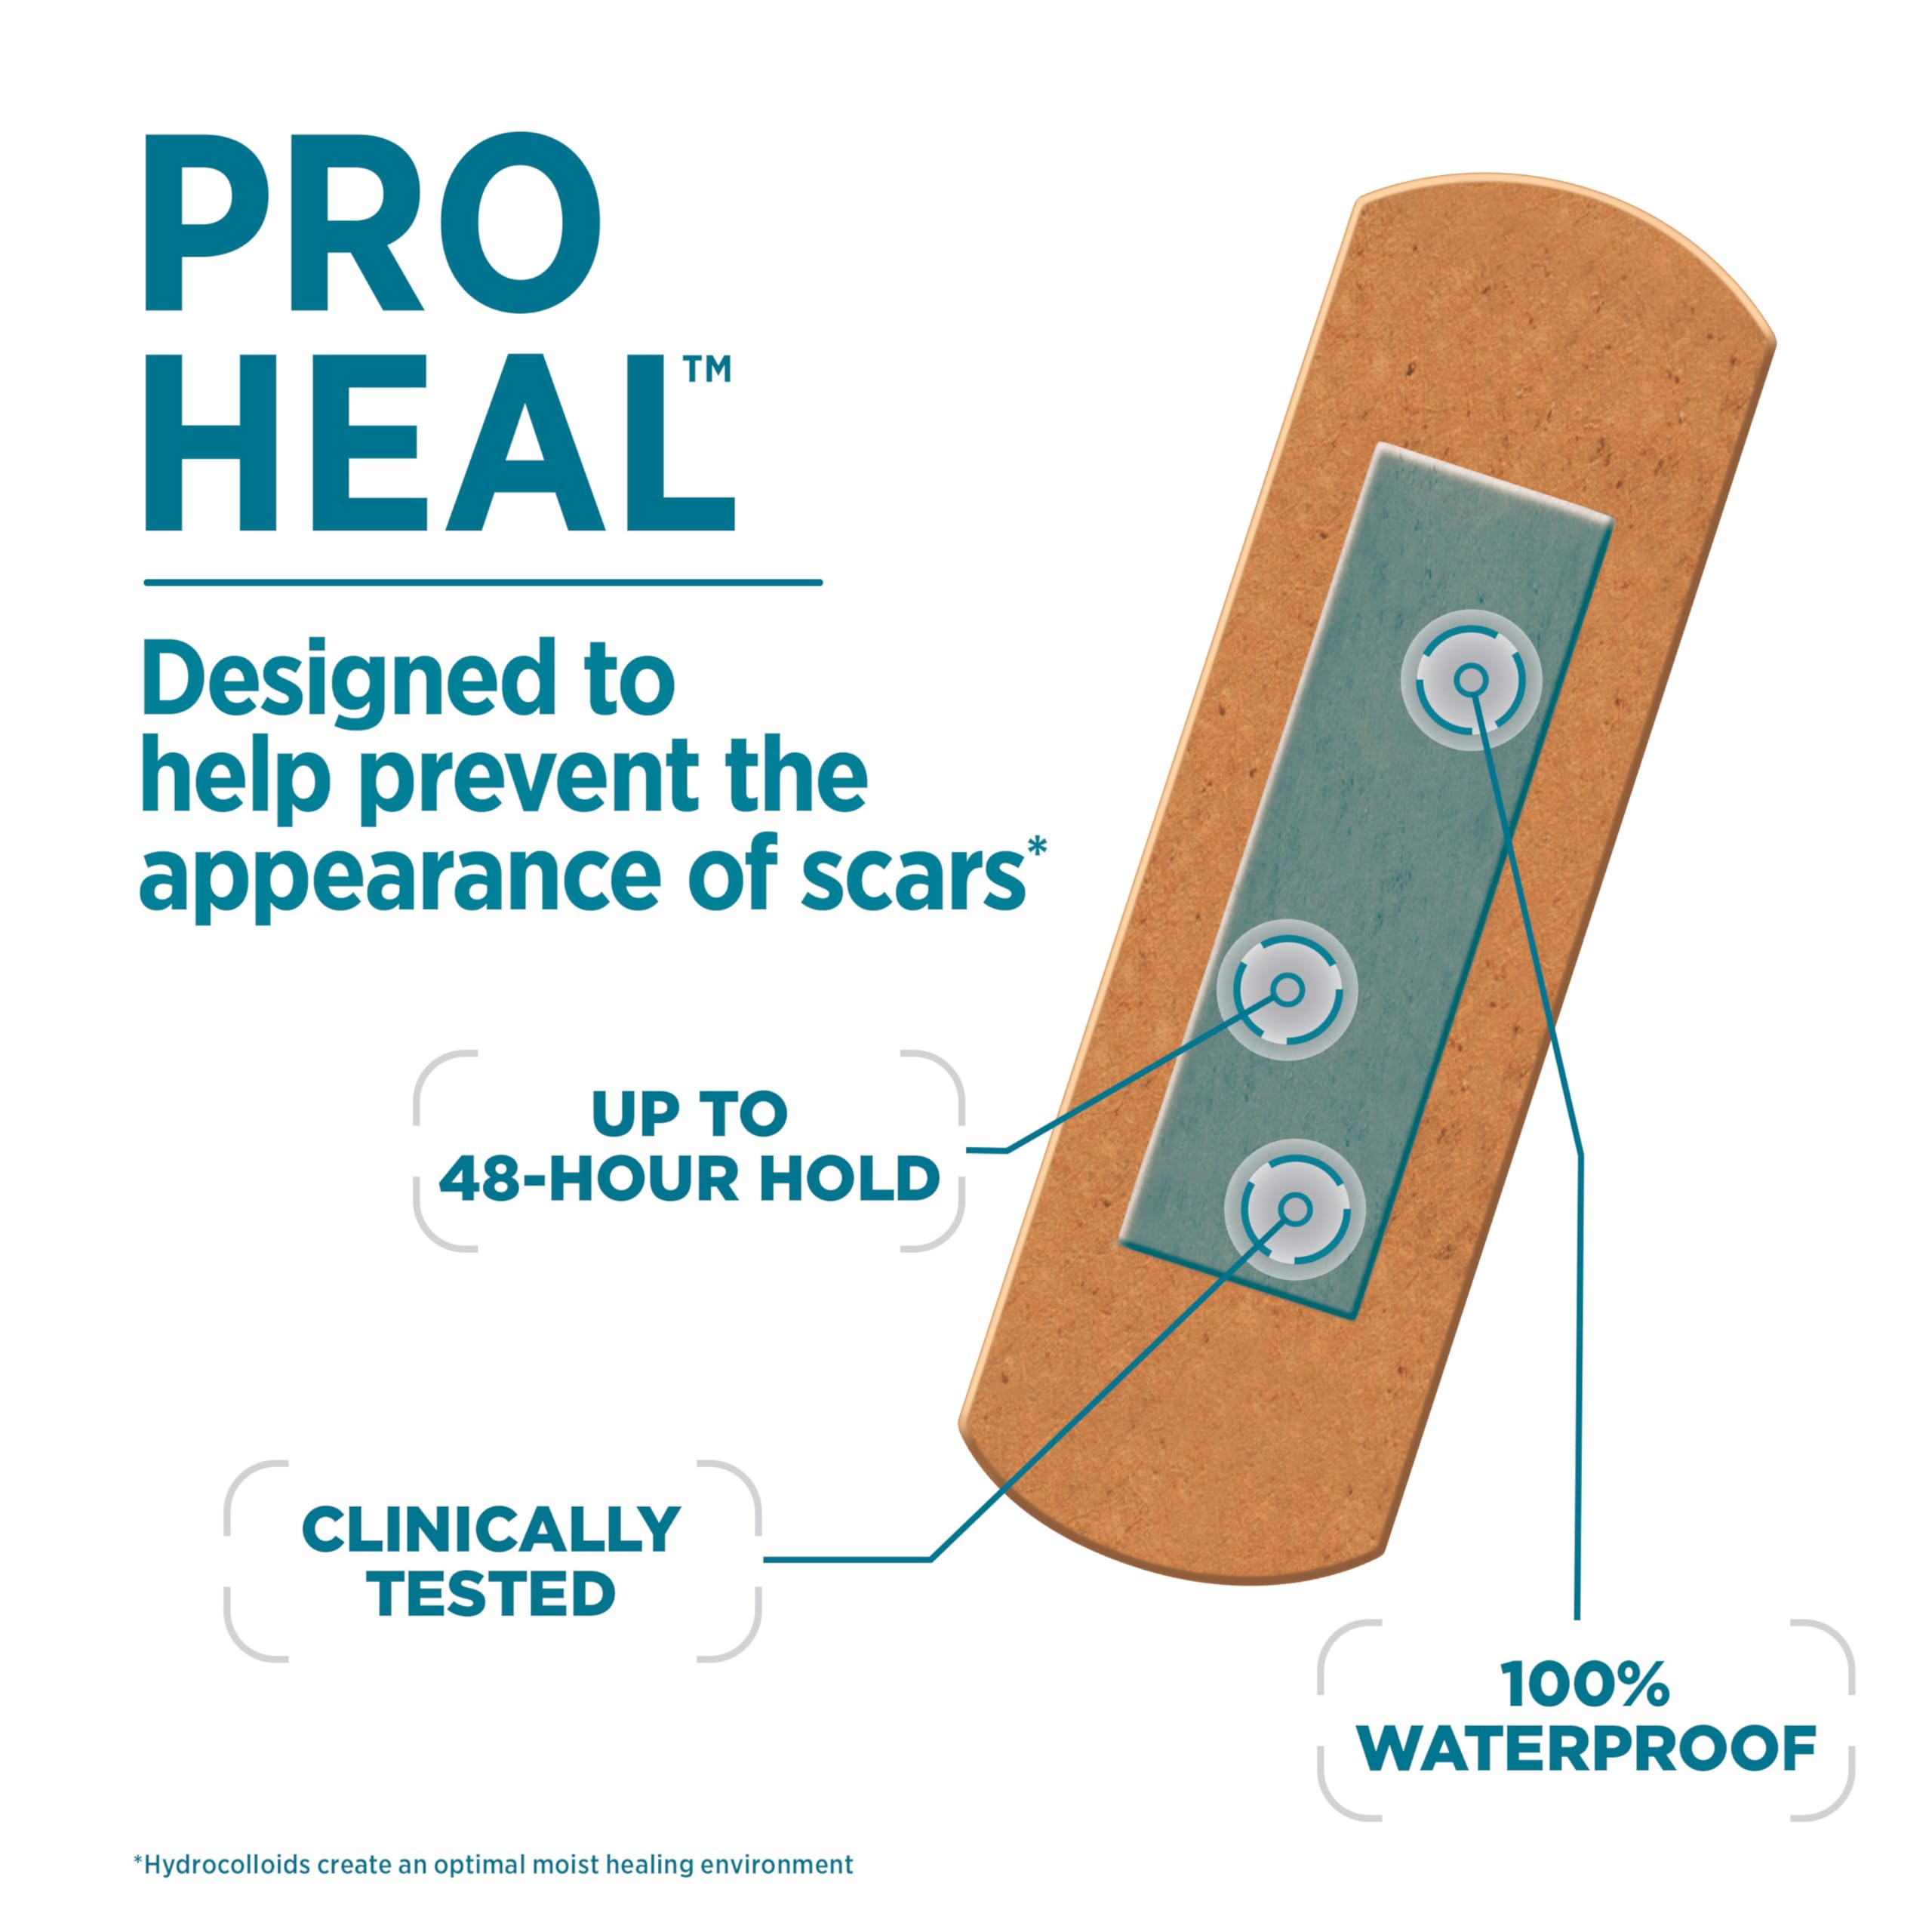 Band-Aid Brand Pro Heal Adhesive Bandages with Hydrocolloid Gel Pad, Clinically Tested Waterproof Bandages, Better Healing of Minor Wounds, Sterile First Aid Bandages, All One Size, 10 ct